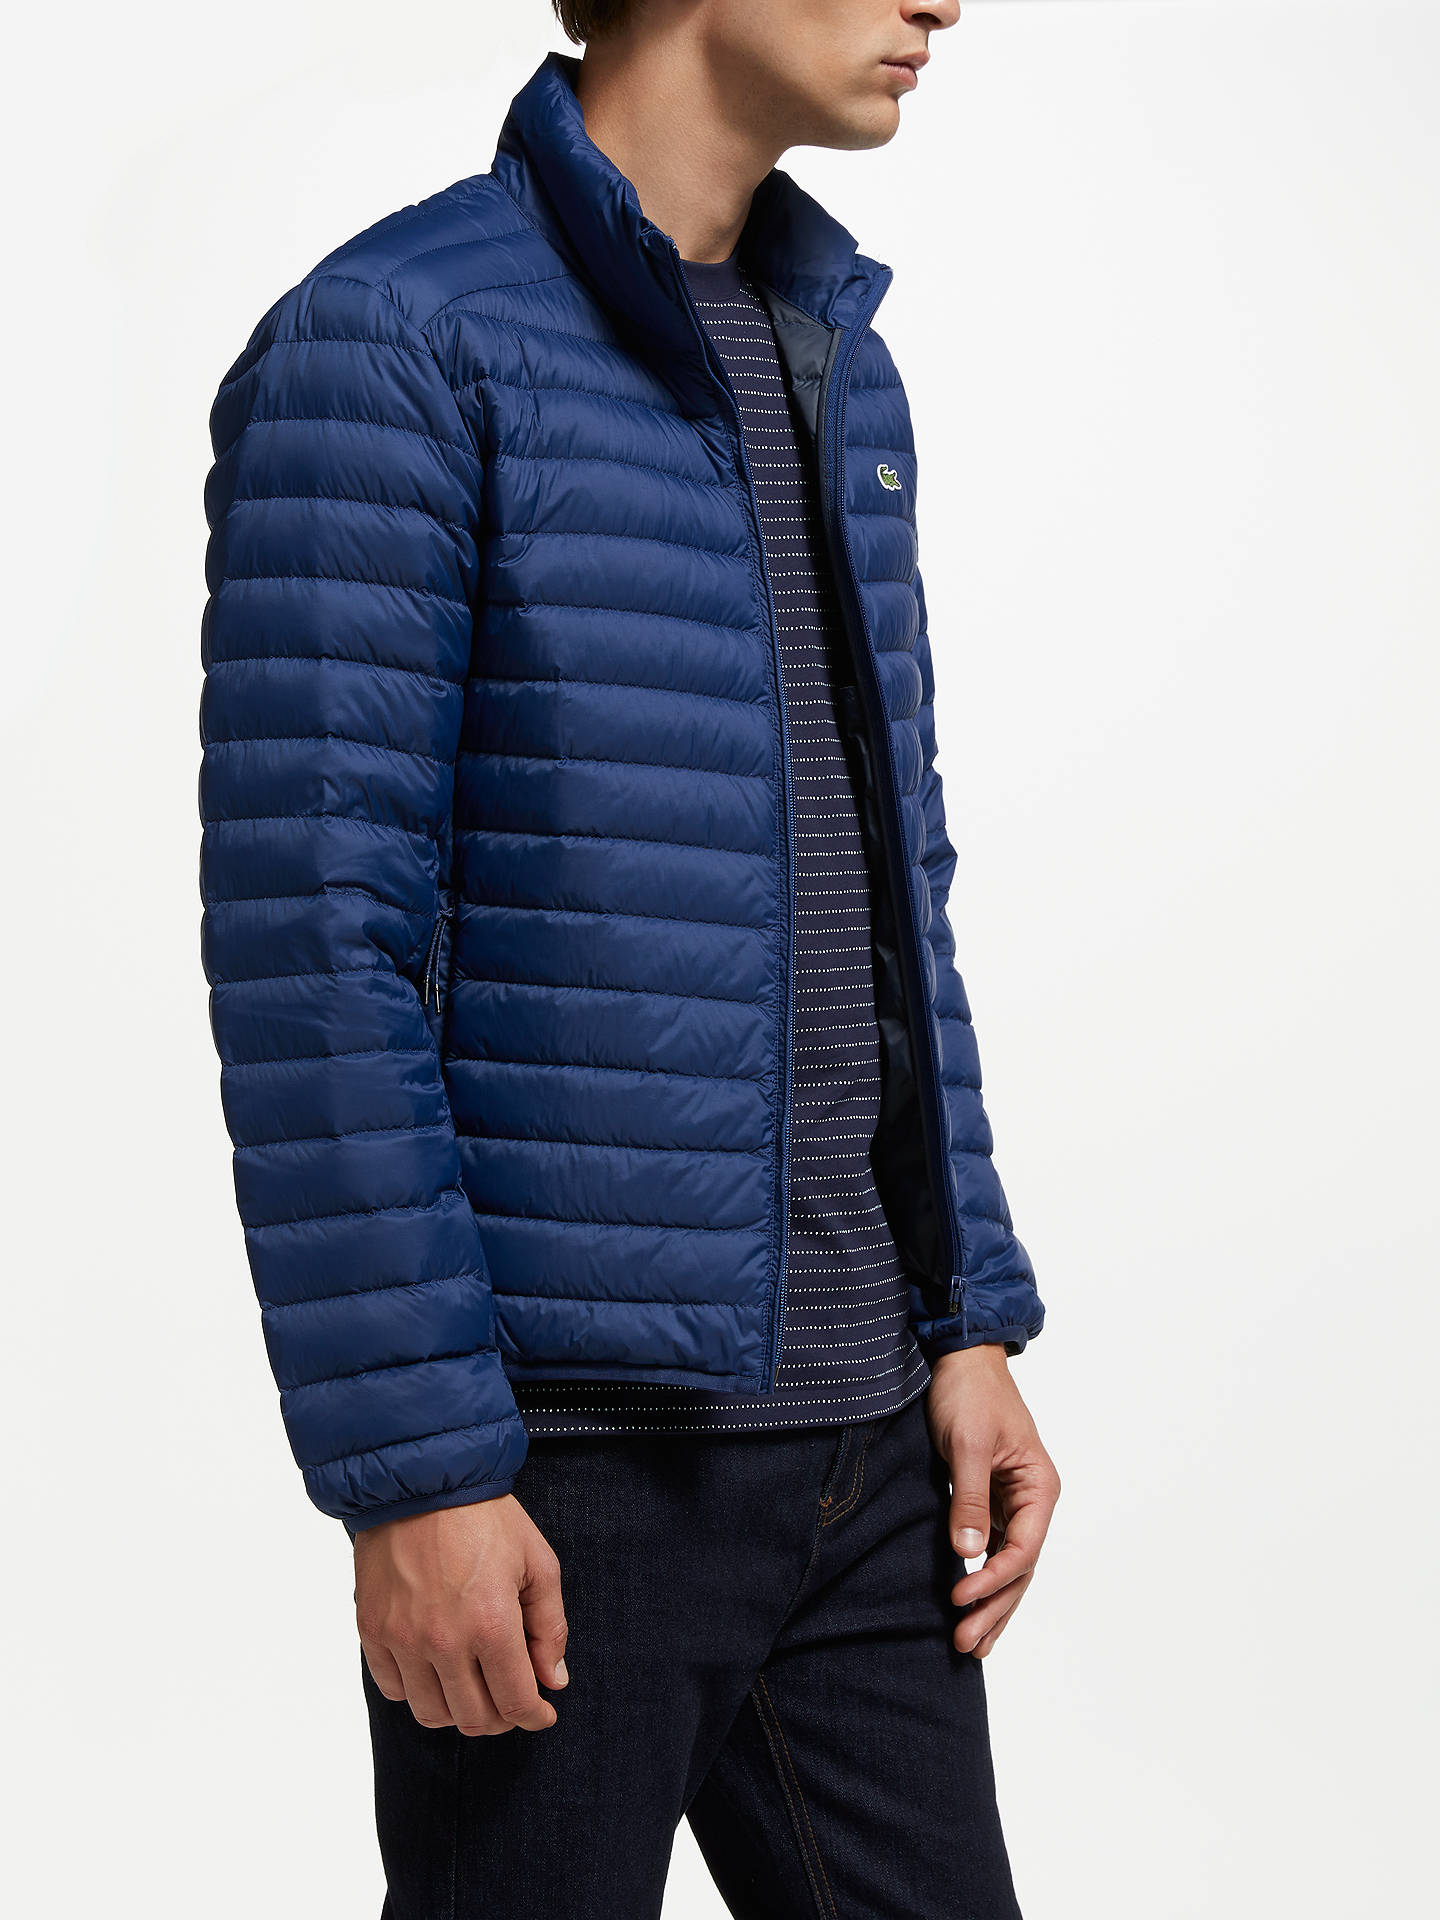 Lacoste Funnel Neck Puffer Jacket, Navy at John Lewis & Partners